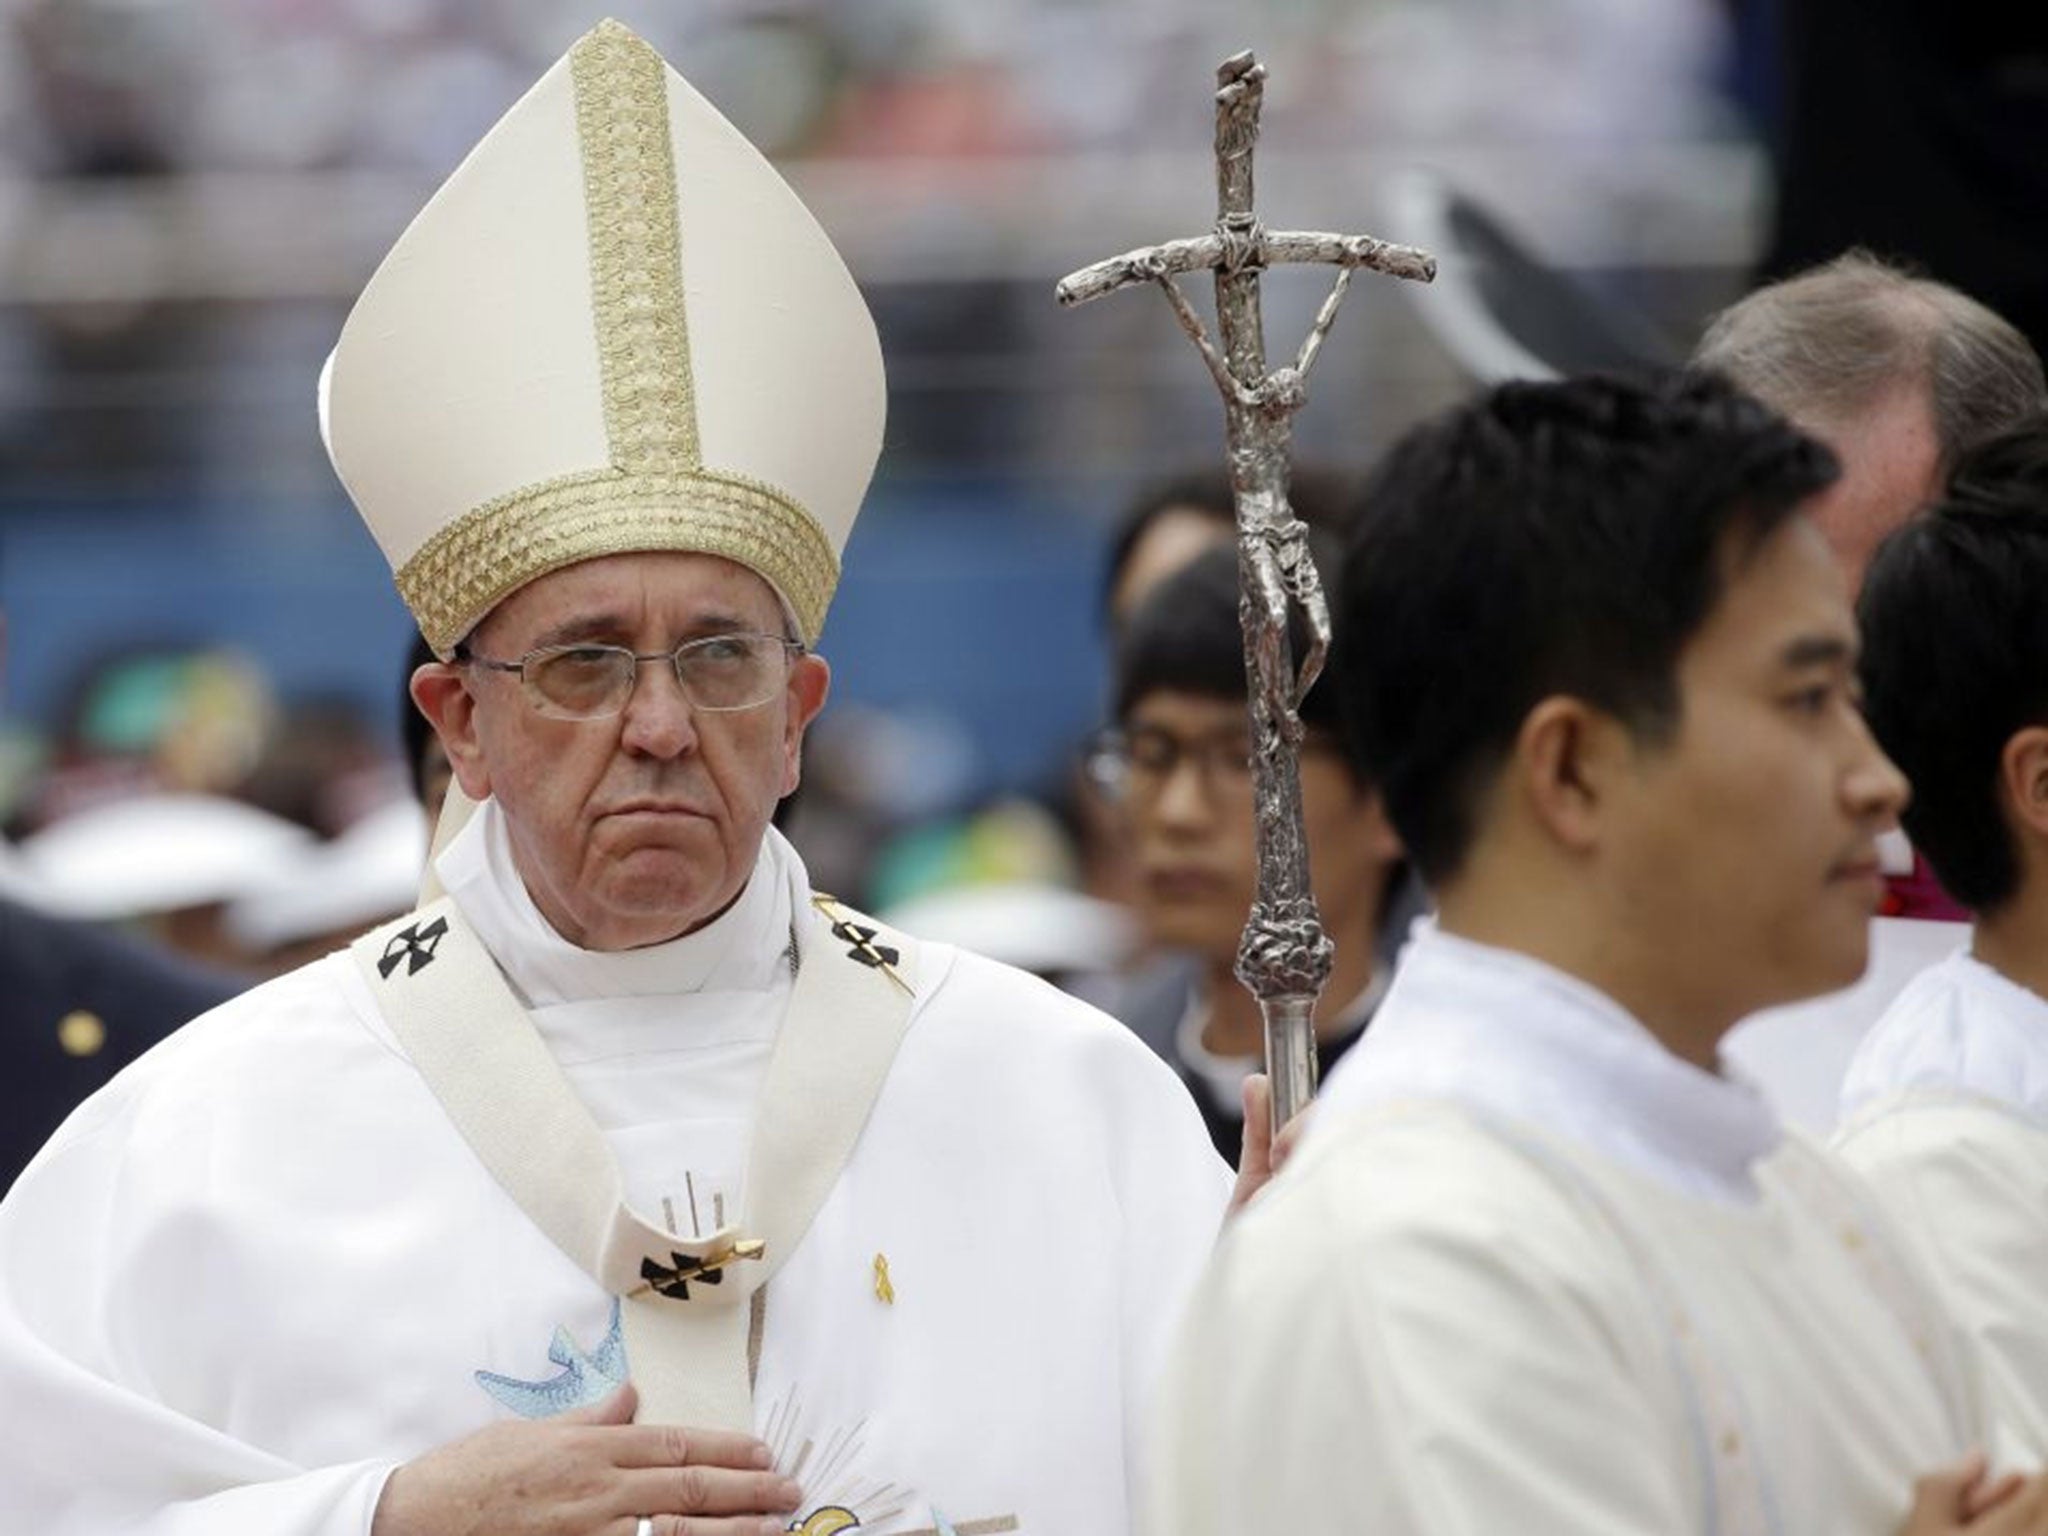 Pope Francis walks with his pastoral staff as he arrives to celebrate a mass in Daejeon's stadium, South Korea, Friday, Aug. 15, 2014.